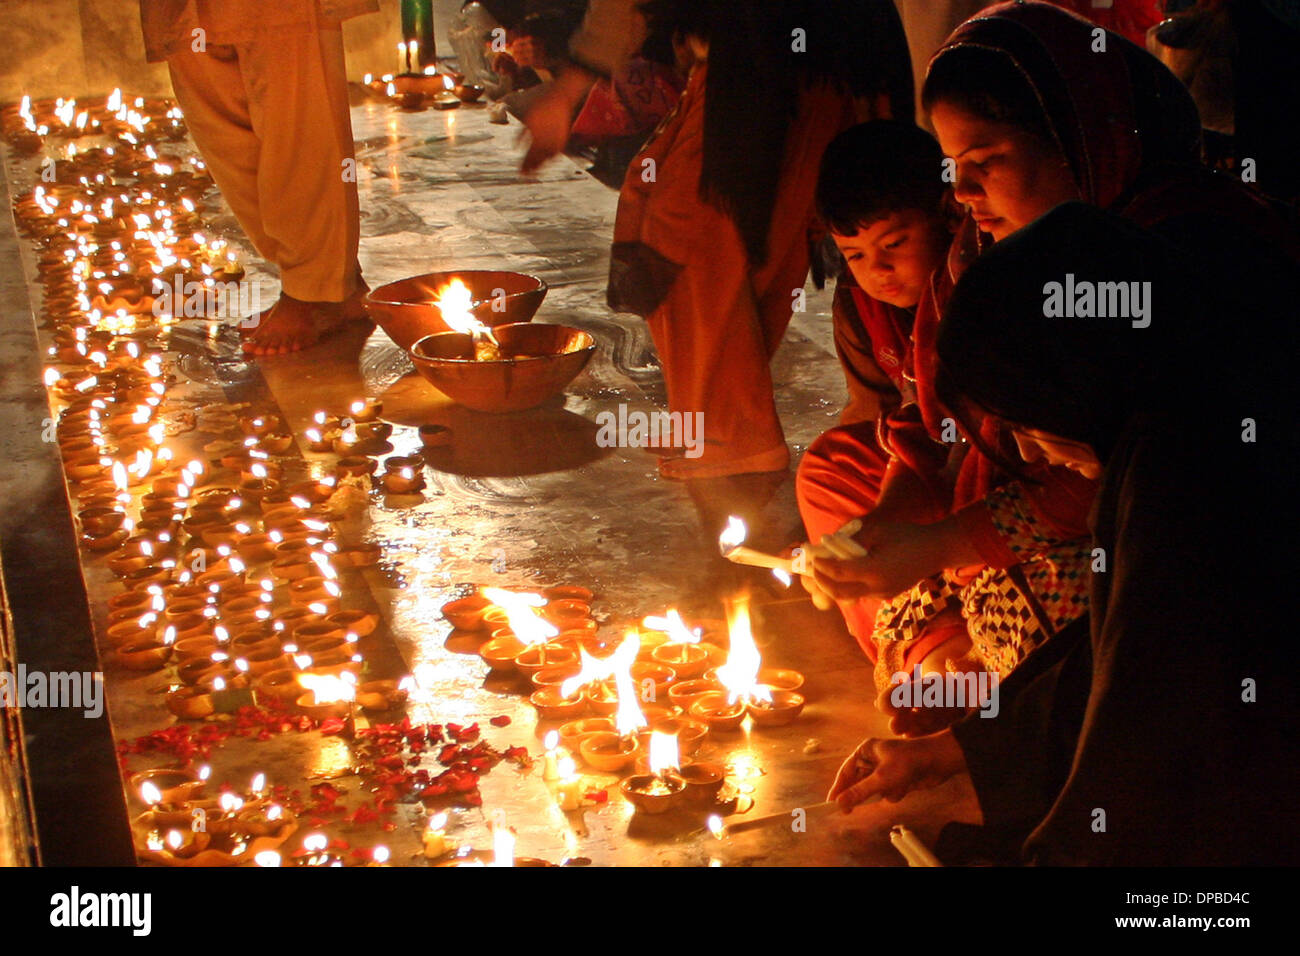 Lahore, Pakistan. 11th Jan, 2014. Pakistani Muslim devotees light oil lamps at the shrine of the Sufi saint Mian Mir Sahib during the last day of a three-day festival marking his 369th death anniversary in eastern Pakistan's Lahore on Jan. 11, 2014. Credit:  Jamil Ahmed/Xinhua/Alamy Live News Stock Photo